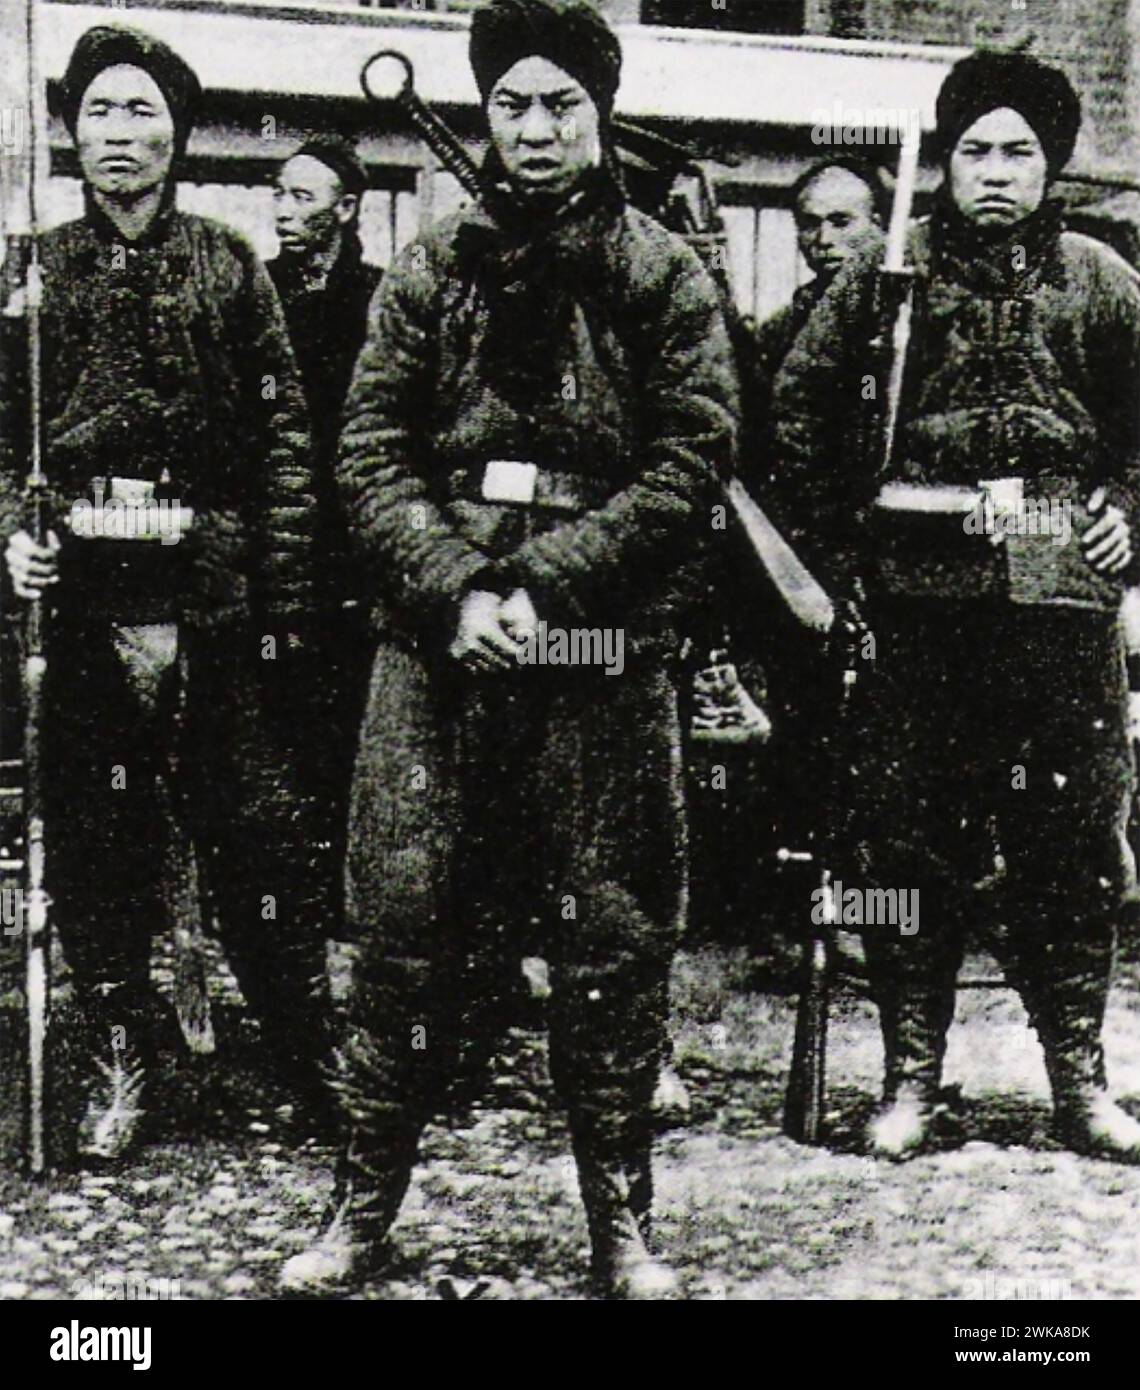 BOXER REBELLION 1899-1901  A group of Boxer soldiers in 1900. Stock Photo